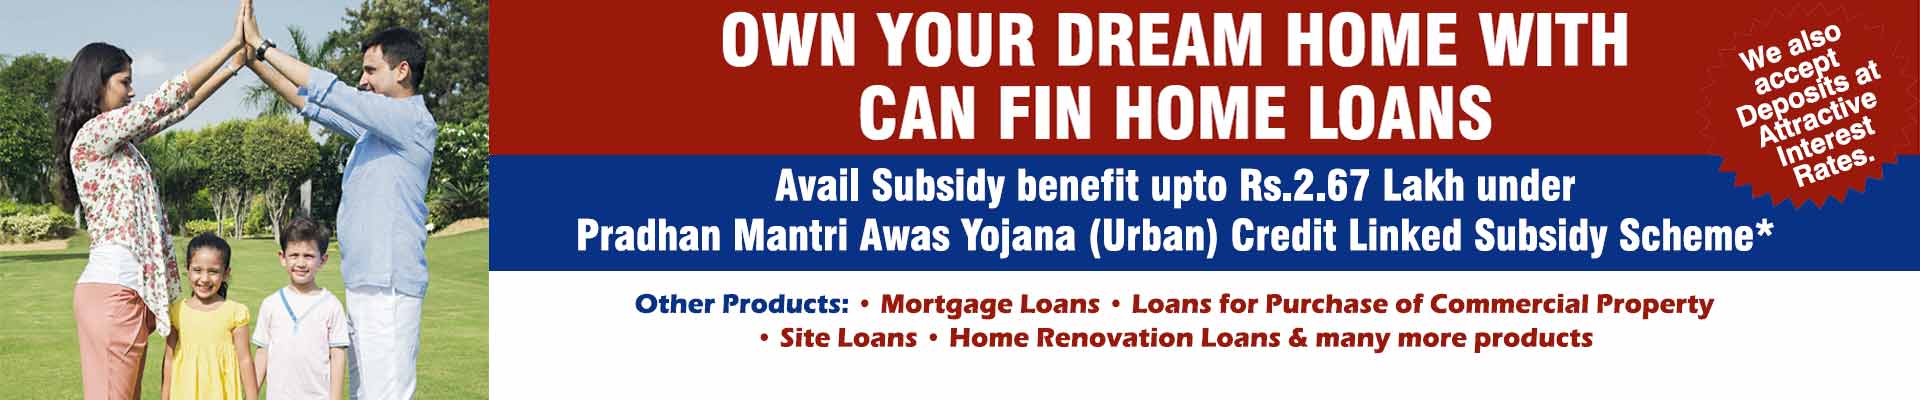 Home Loans India